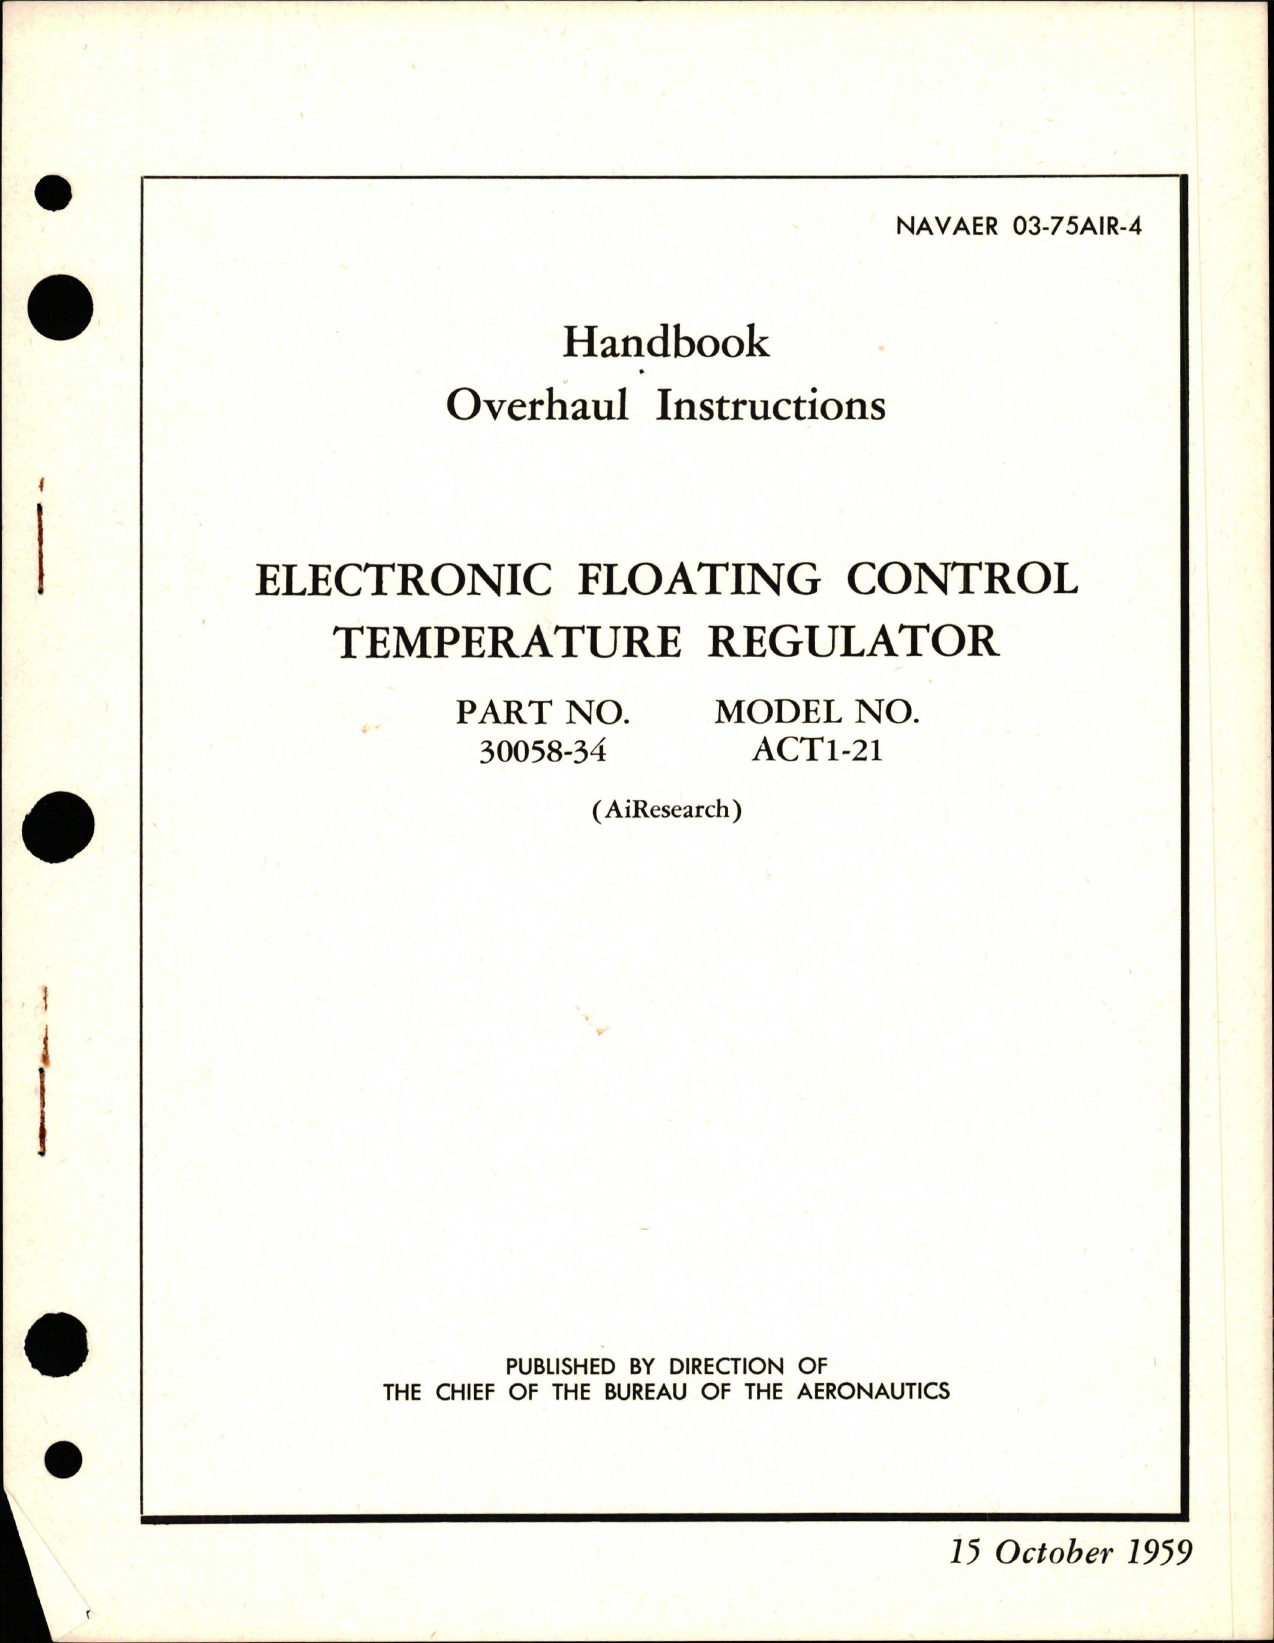 Sample page 1 from AirCorps Library document: Overhaul Instructions for Electronic Floating Control Temperature Regulator - Part 30058-34 - Model ACT1-21